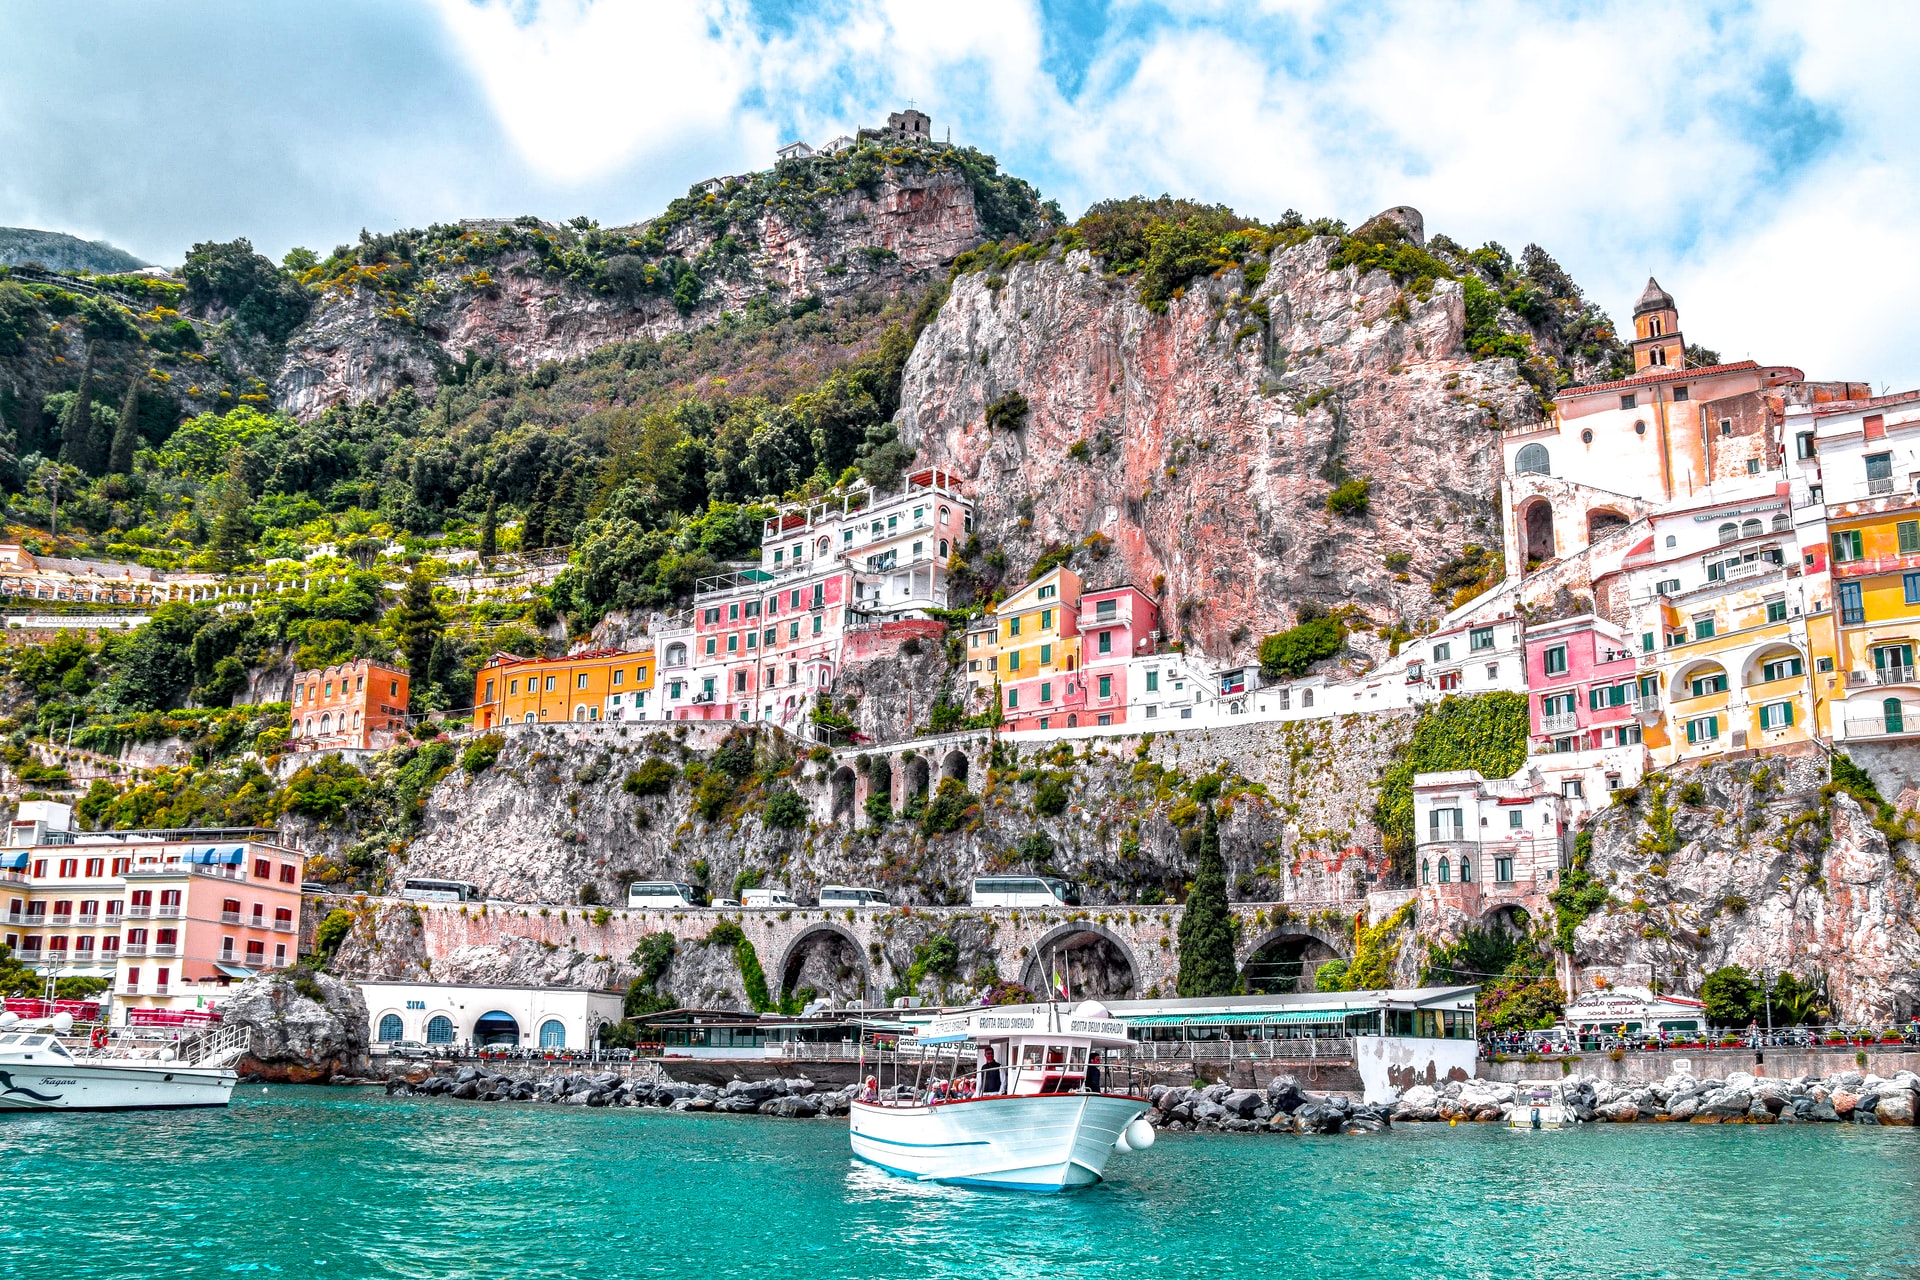 A view from the water of a town of colourful buildings are built along the steep incline of a cliff.